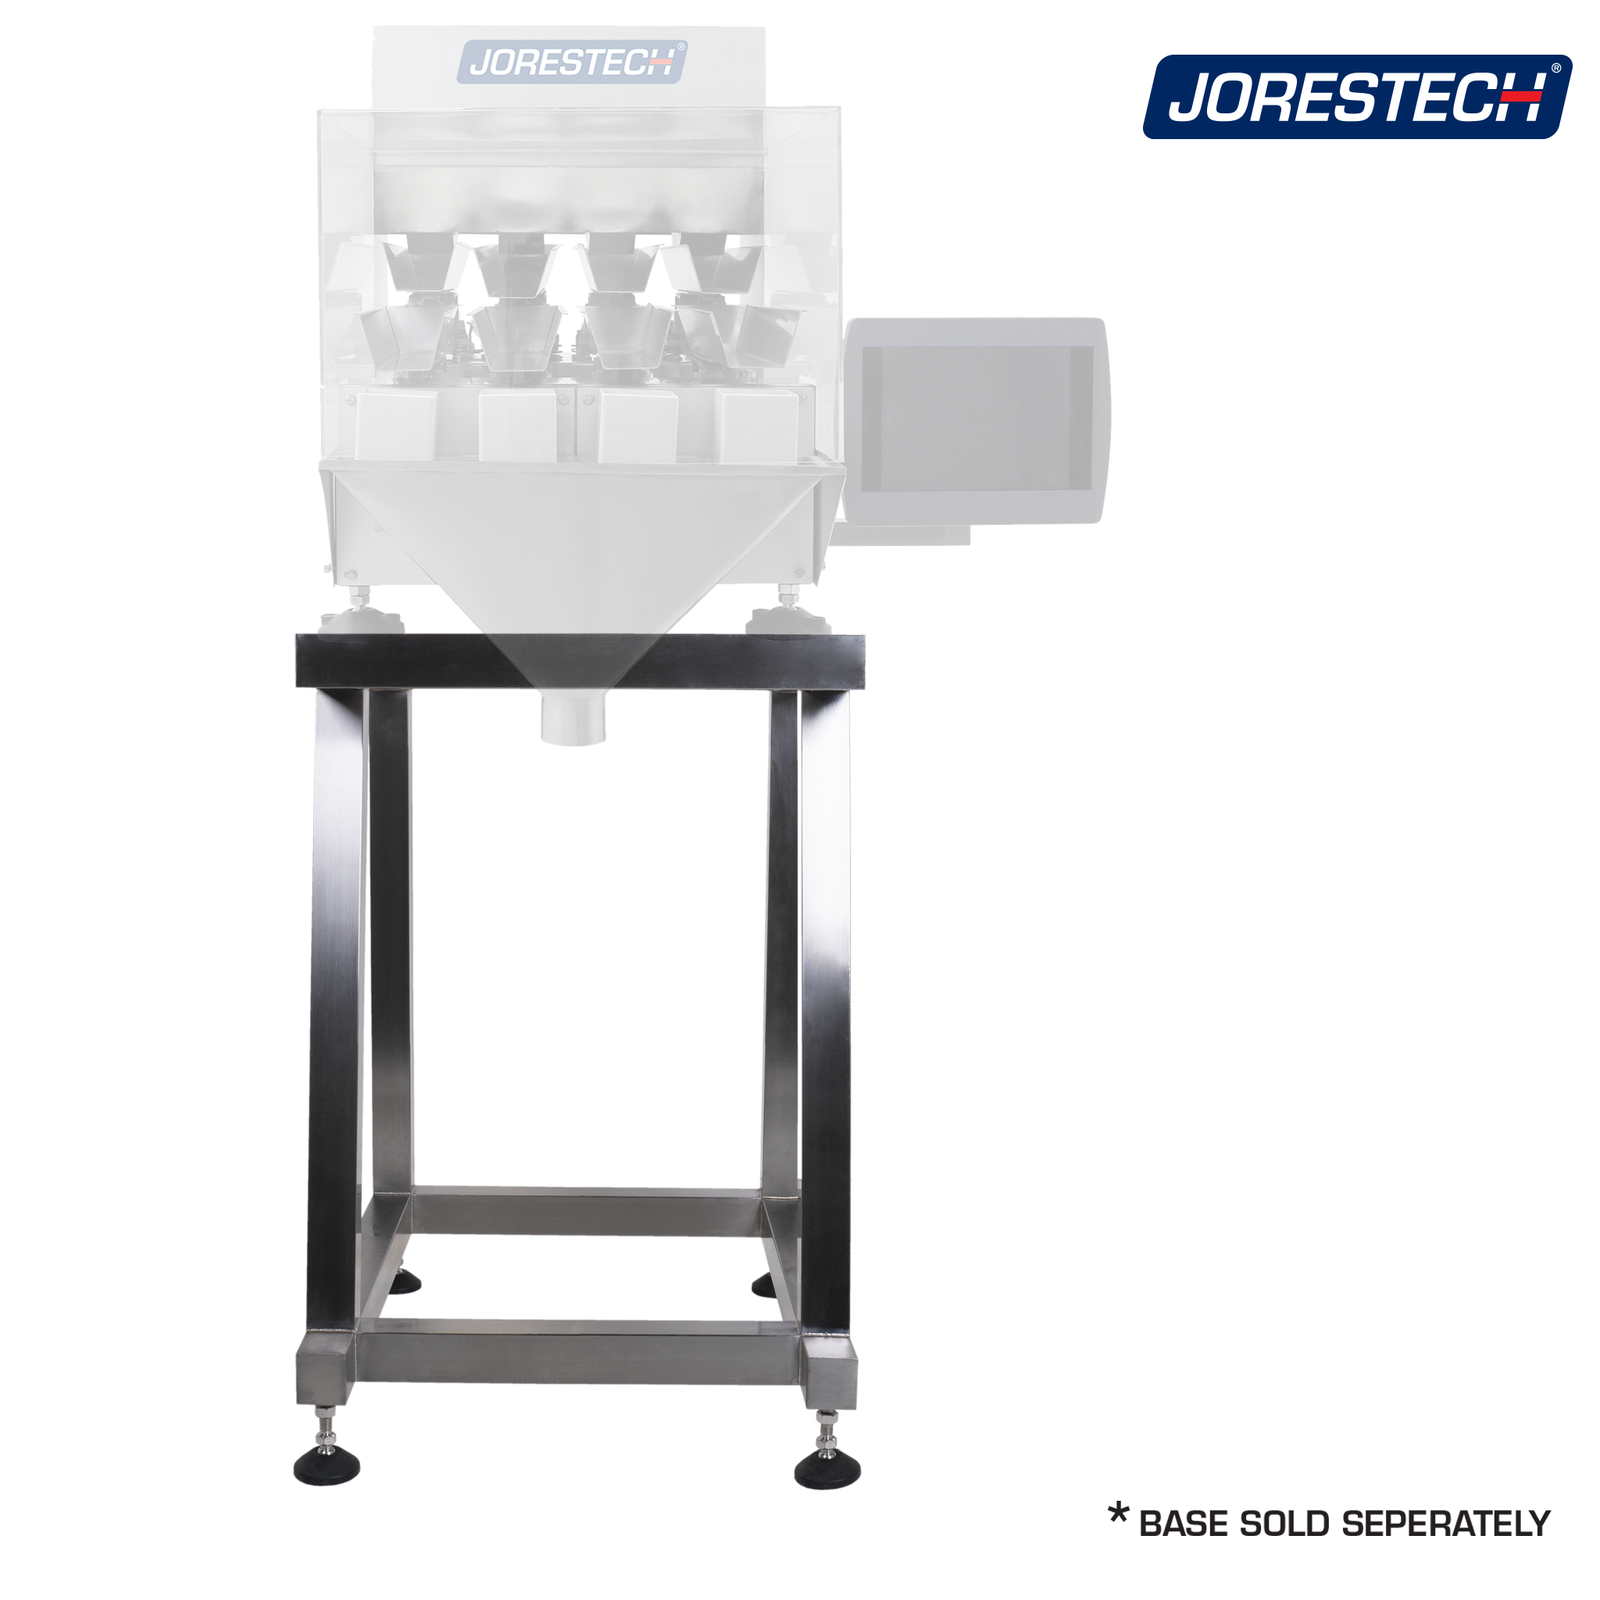 Stainless steel stand used only for the JORES TECHNOLOGIES® linear weigher Parallax 403